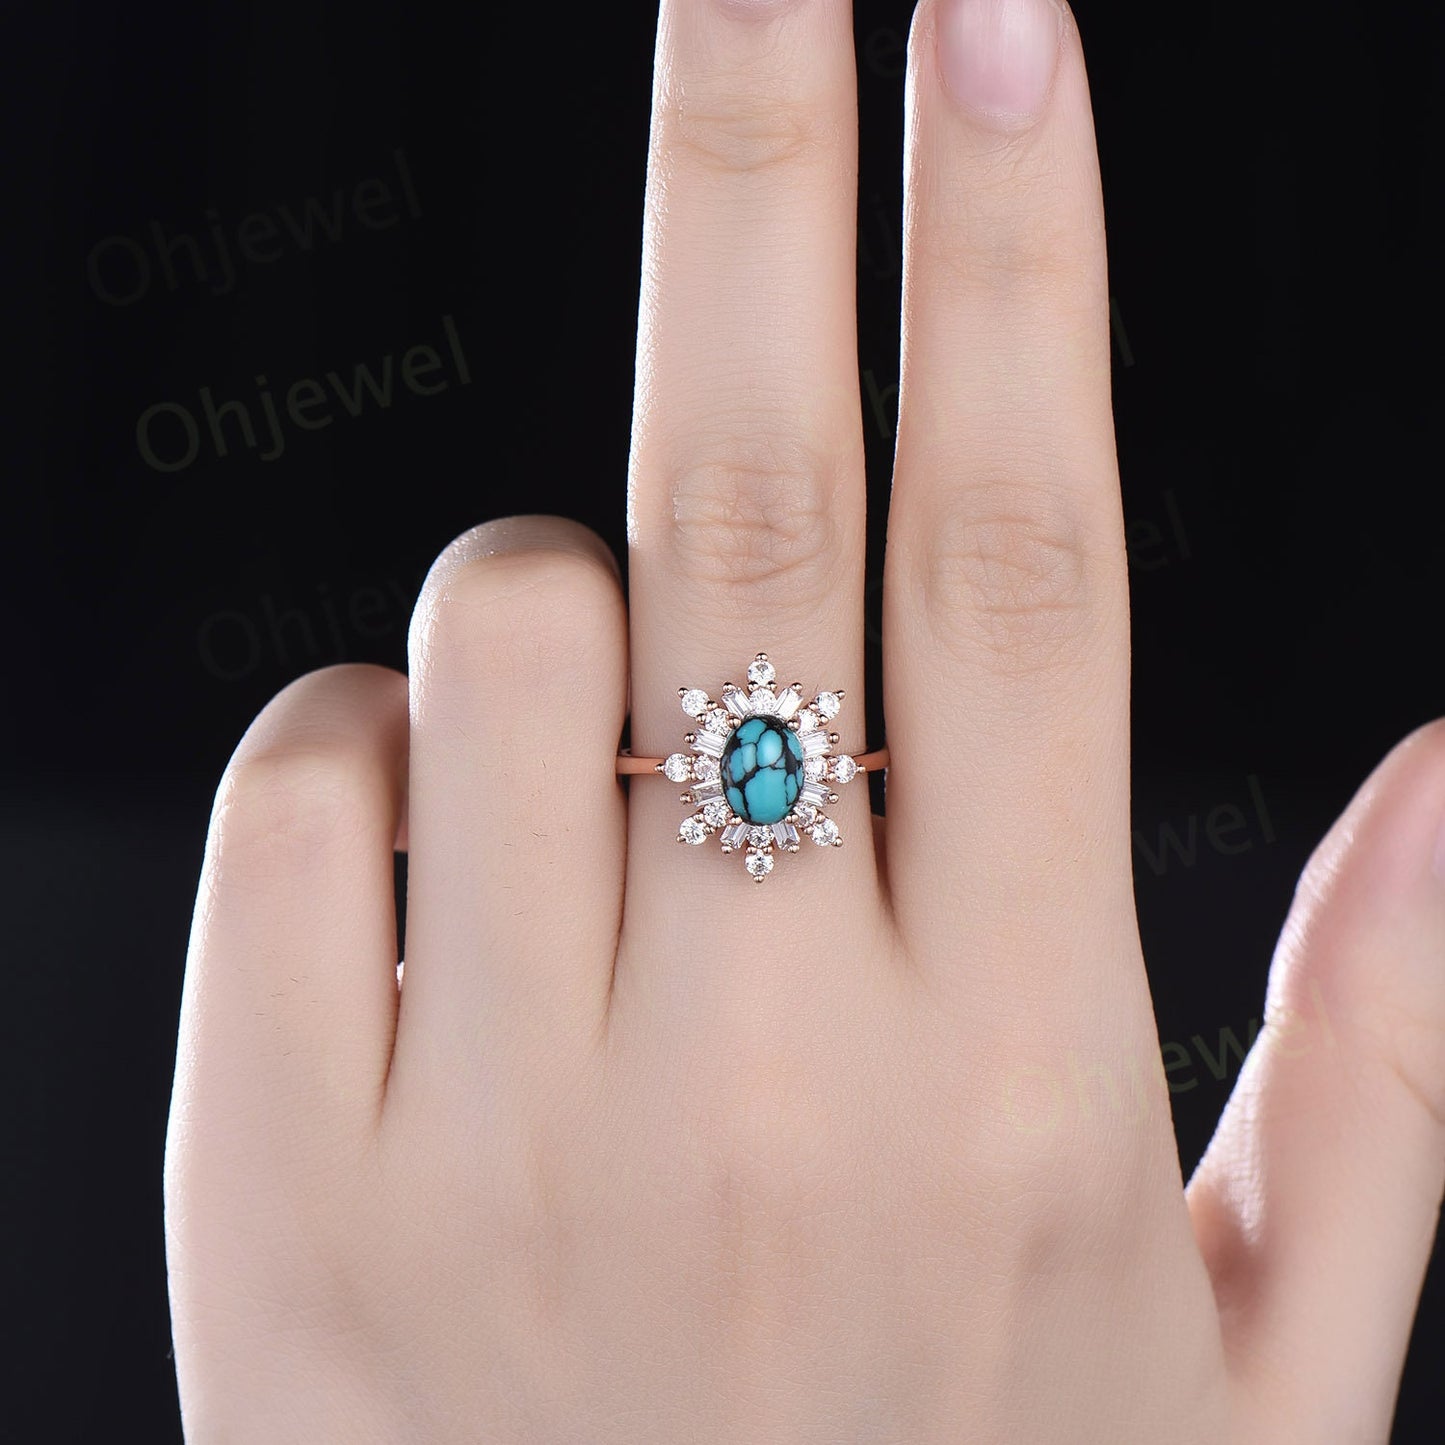 Oval cut natural Turquoise ring vintage rose gold halo unique engagement ring women cluster baguette cut moissanite wedding promise ring